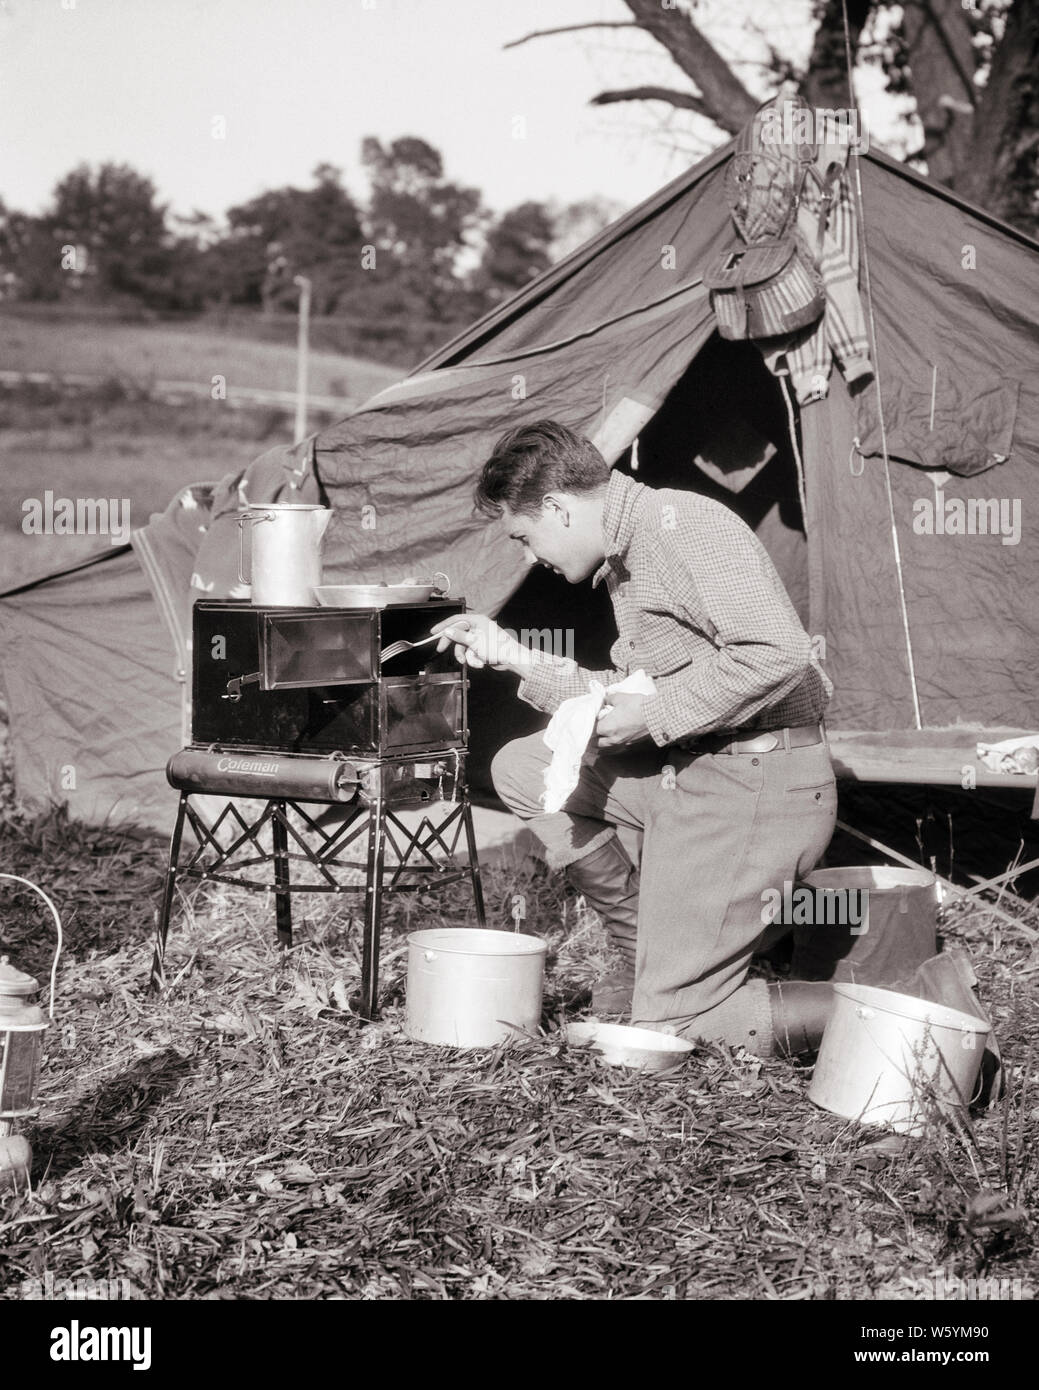 bevestig alstublieft ring Wegversperring 1920s INDEPENDENT YOUNG MAN TENT CAMPING ON FISHING TRIP COOKING MEAL ON  METAL GAS STOVE - c1969 HAR001 HARS PERSONS INSPIRATION MALES SPIRITUALITY  CONFIDENCE B&W FREEDOM SUCCESS TIME OFF HAPPINESS ADVENTURE STRENGTH